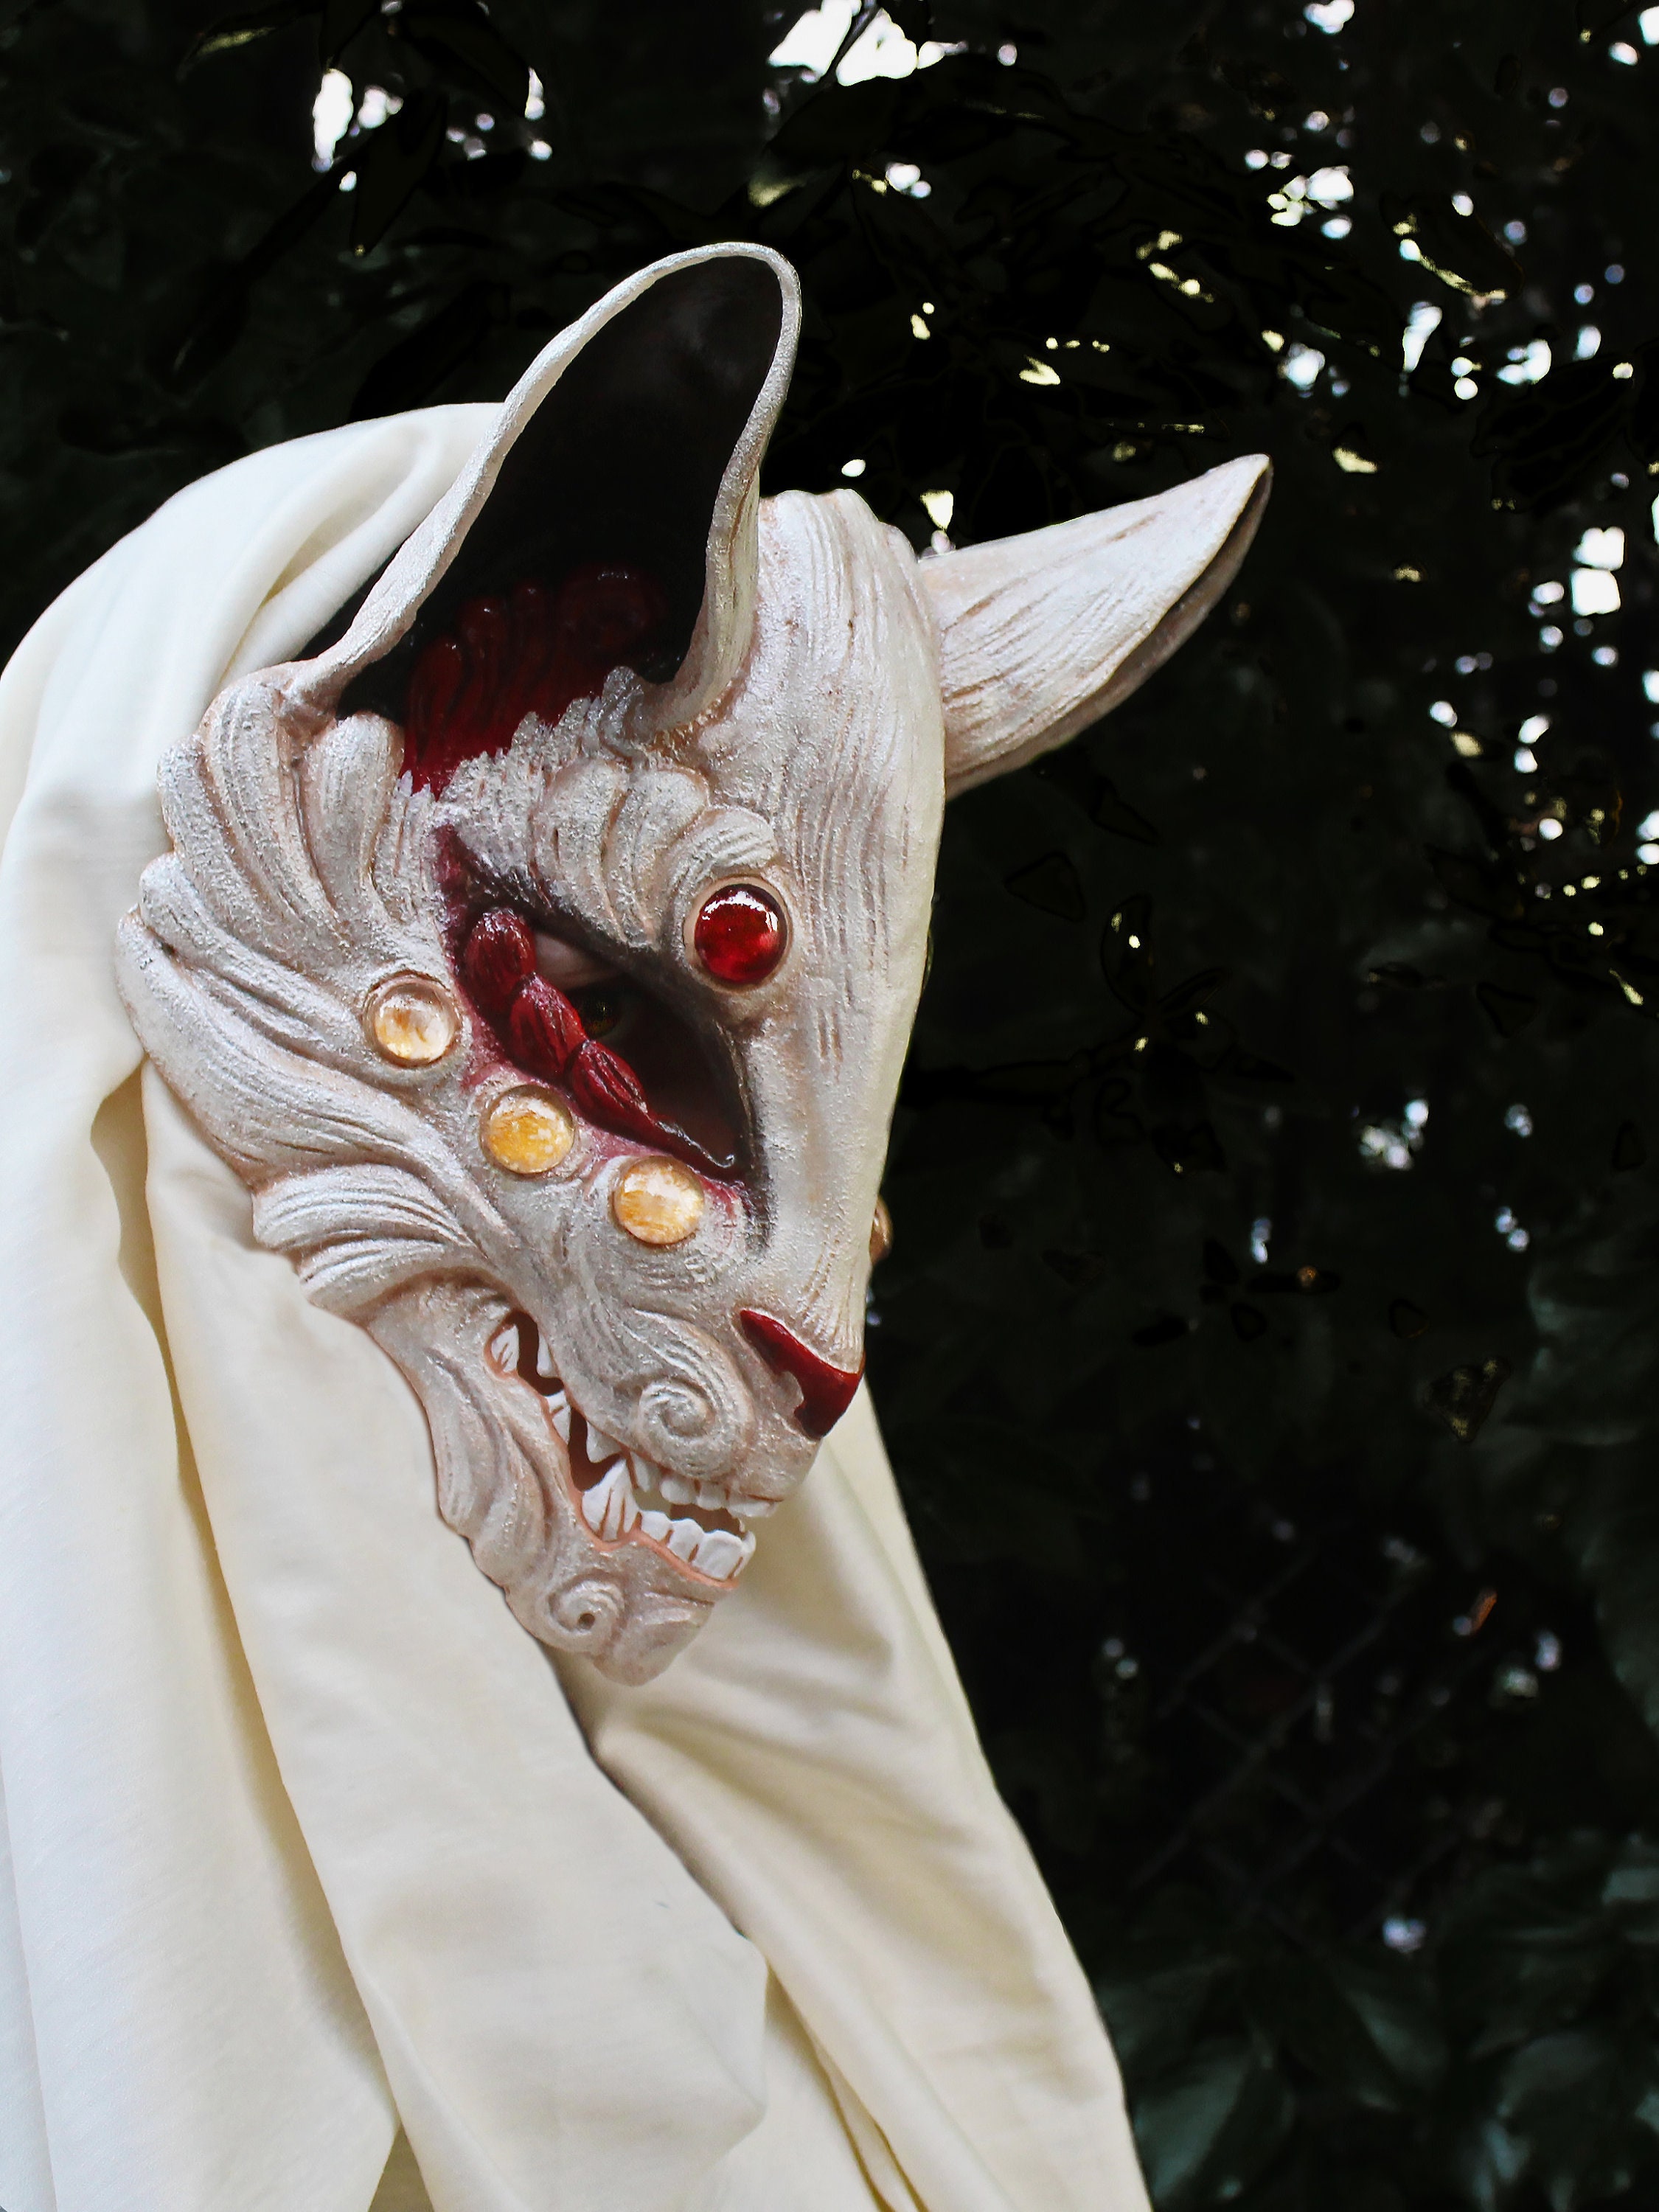 Kitsune Mask, White Fox Mask, Japanese Vintage Fox Mask, Lucky Charm, A Symbol of Magical Powers, Gods' Messengers Hight 5.5 Inches